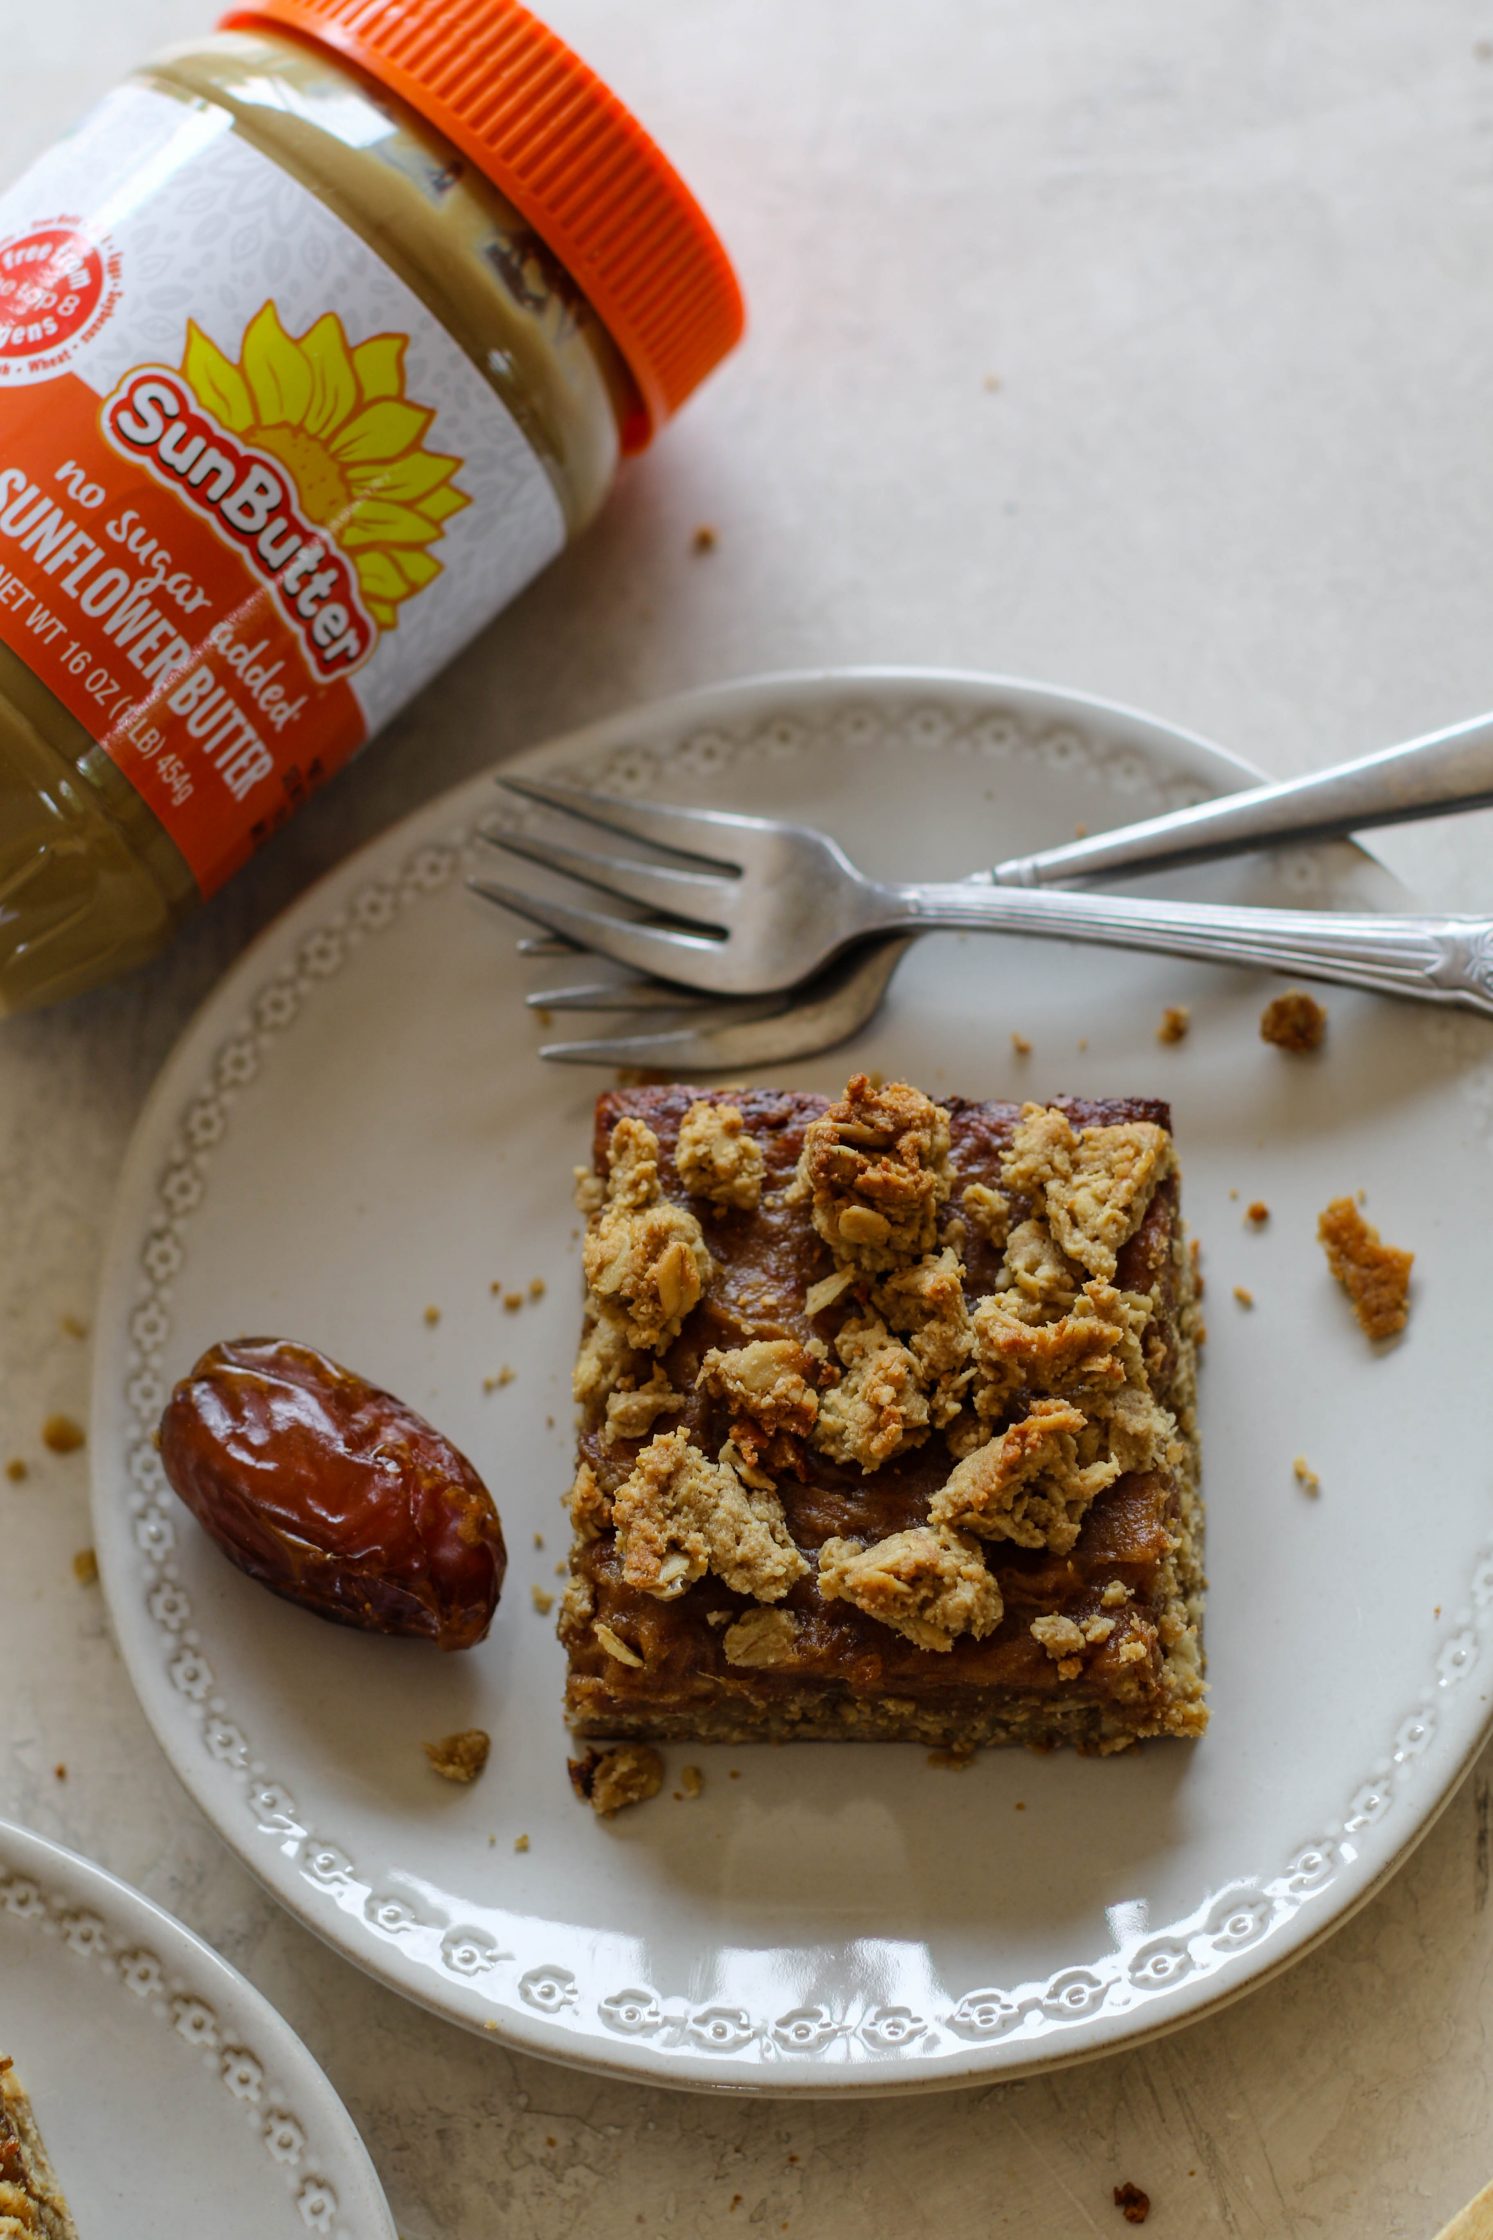 SunButter Date Squares served on a plate with SunButter jar and forks by Flora & Vino